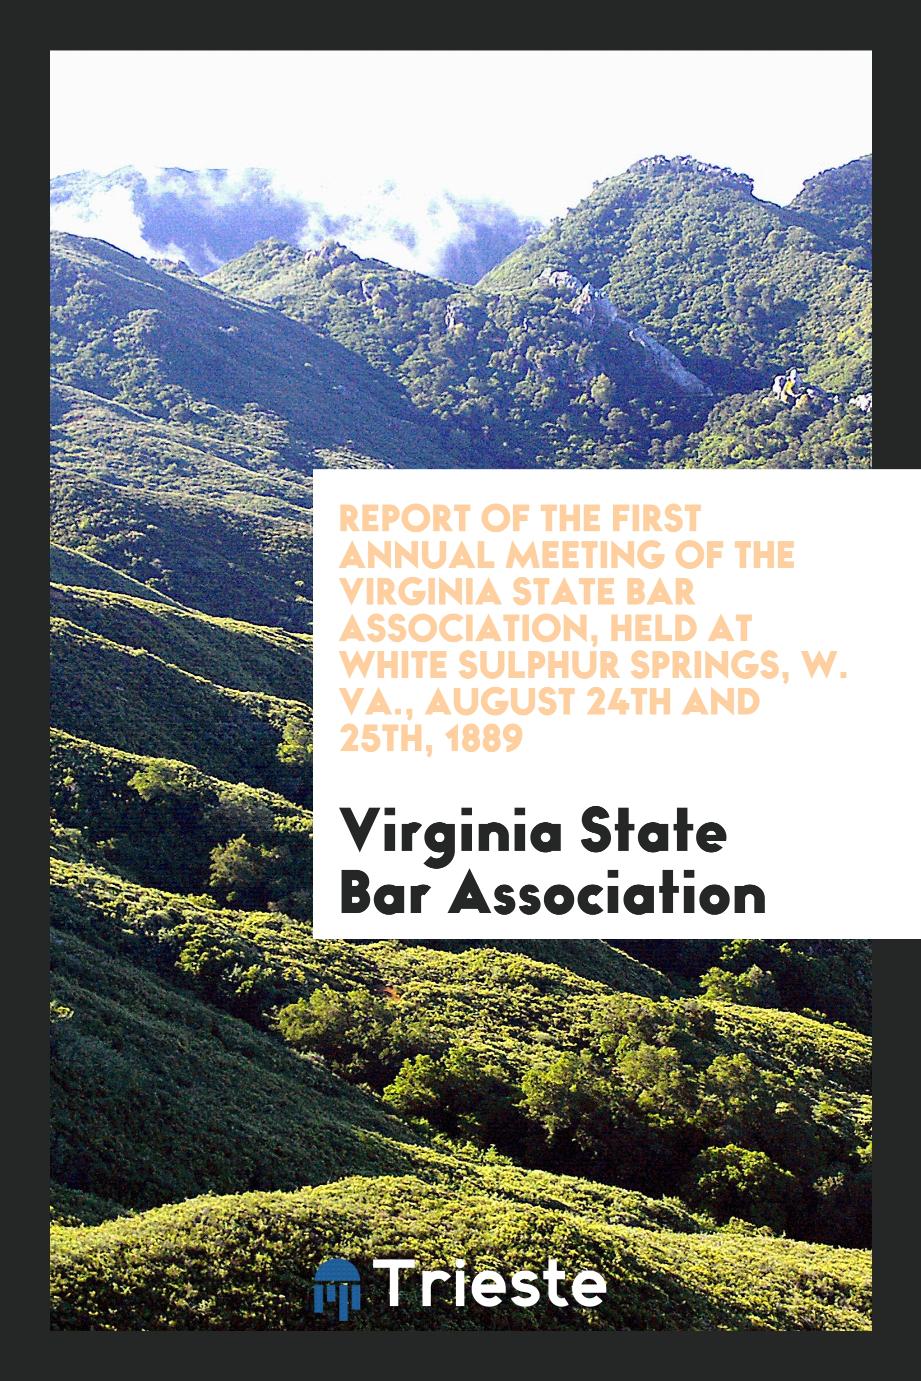 Report of the First Annual Meeting of the Virginia State Bar Association, Held at White Sulphur Springs, W. VA., August 24th and 25th, 1889